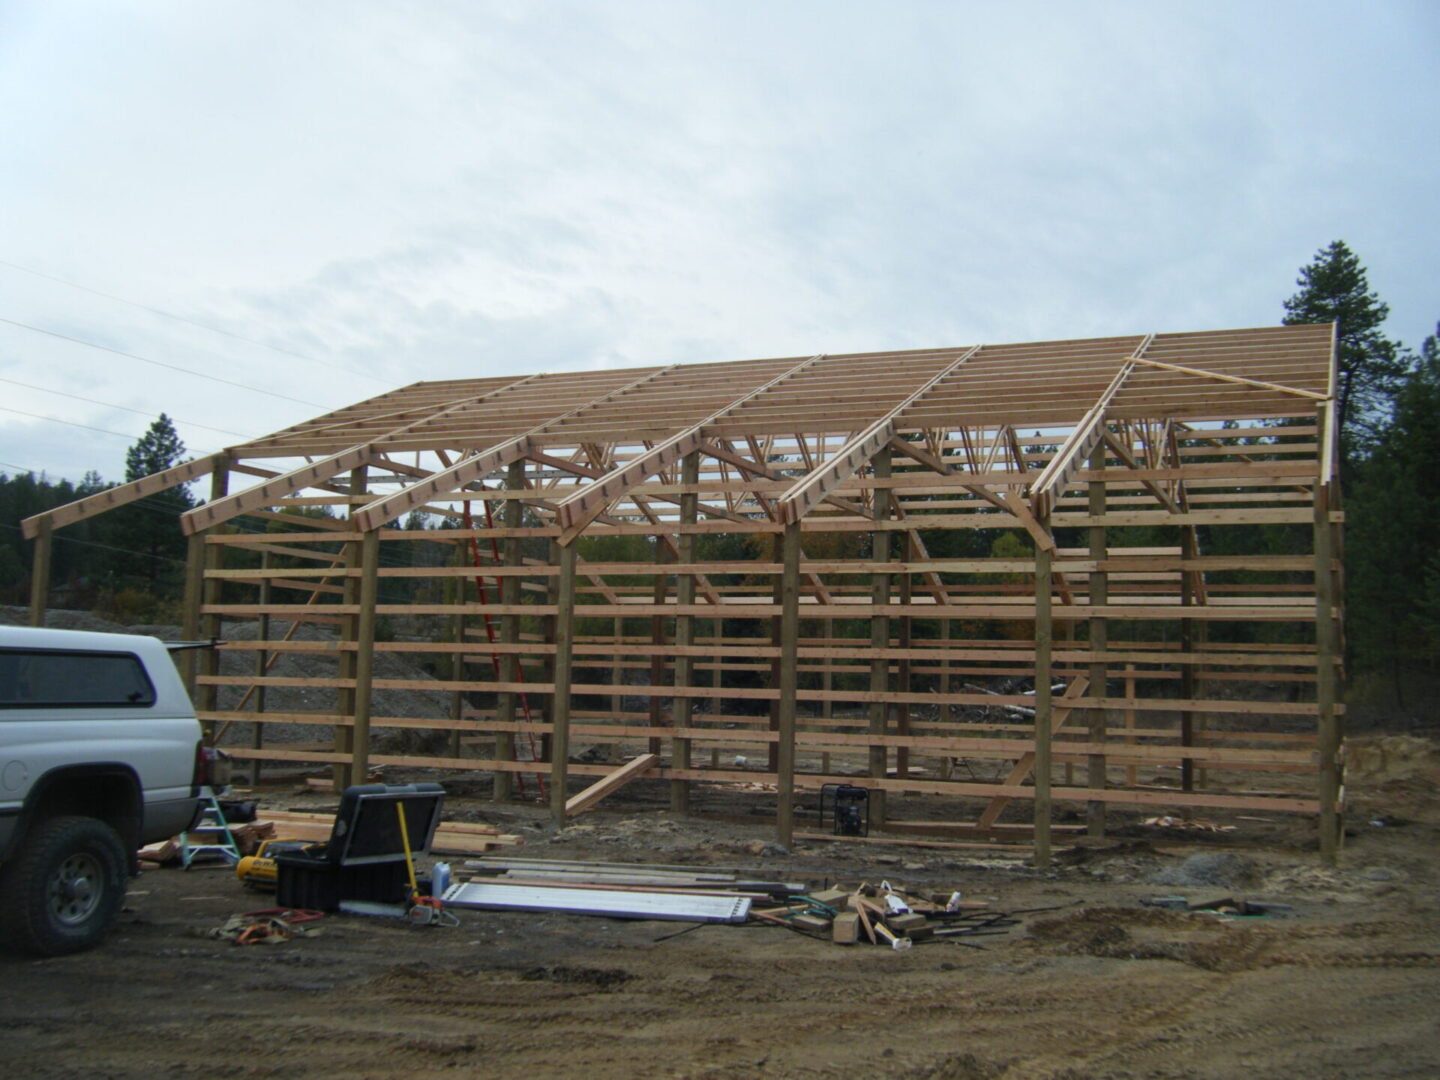 Side view of the wooden foundation of a new house being constructed